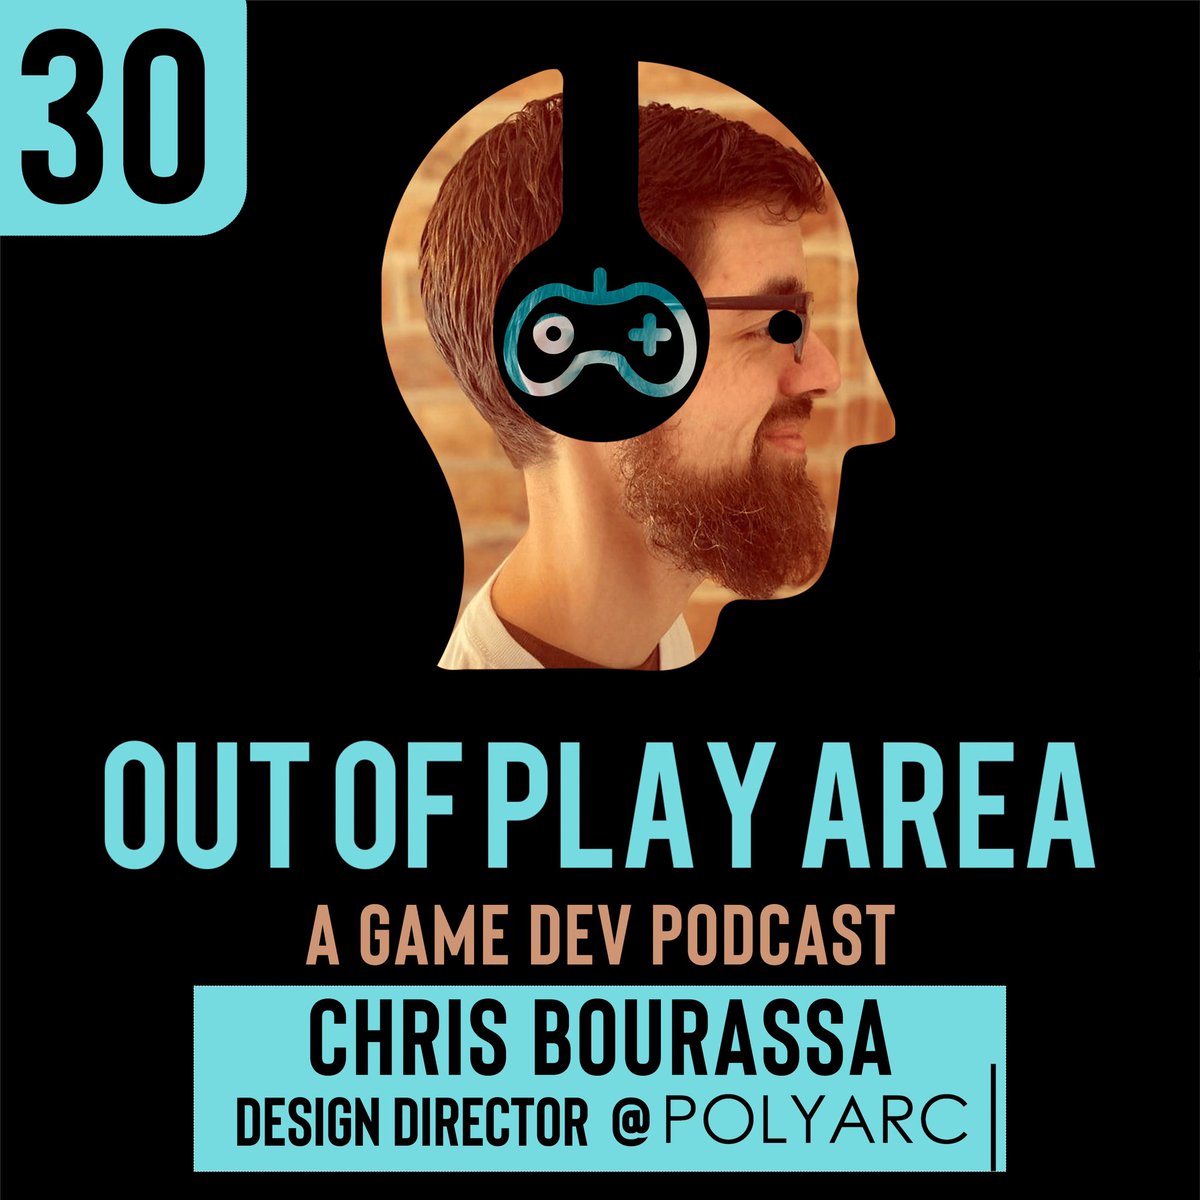 Episode 30 debuts this Monday featuring @Bourassa86 a Design Director at @PolyarcGames where we talk Moss , Midnight Club LA, Red Dead Redemption online and interview tips ++
Who will be there? #gamedev 

by @ElKingpin on @podbeancom edited with @DescriptApp #madeonzencastr